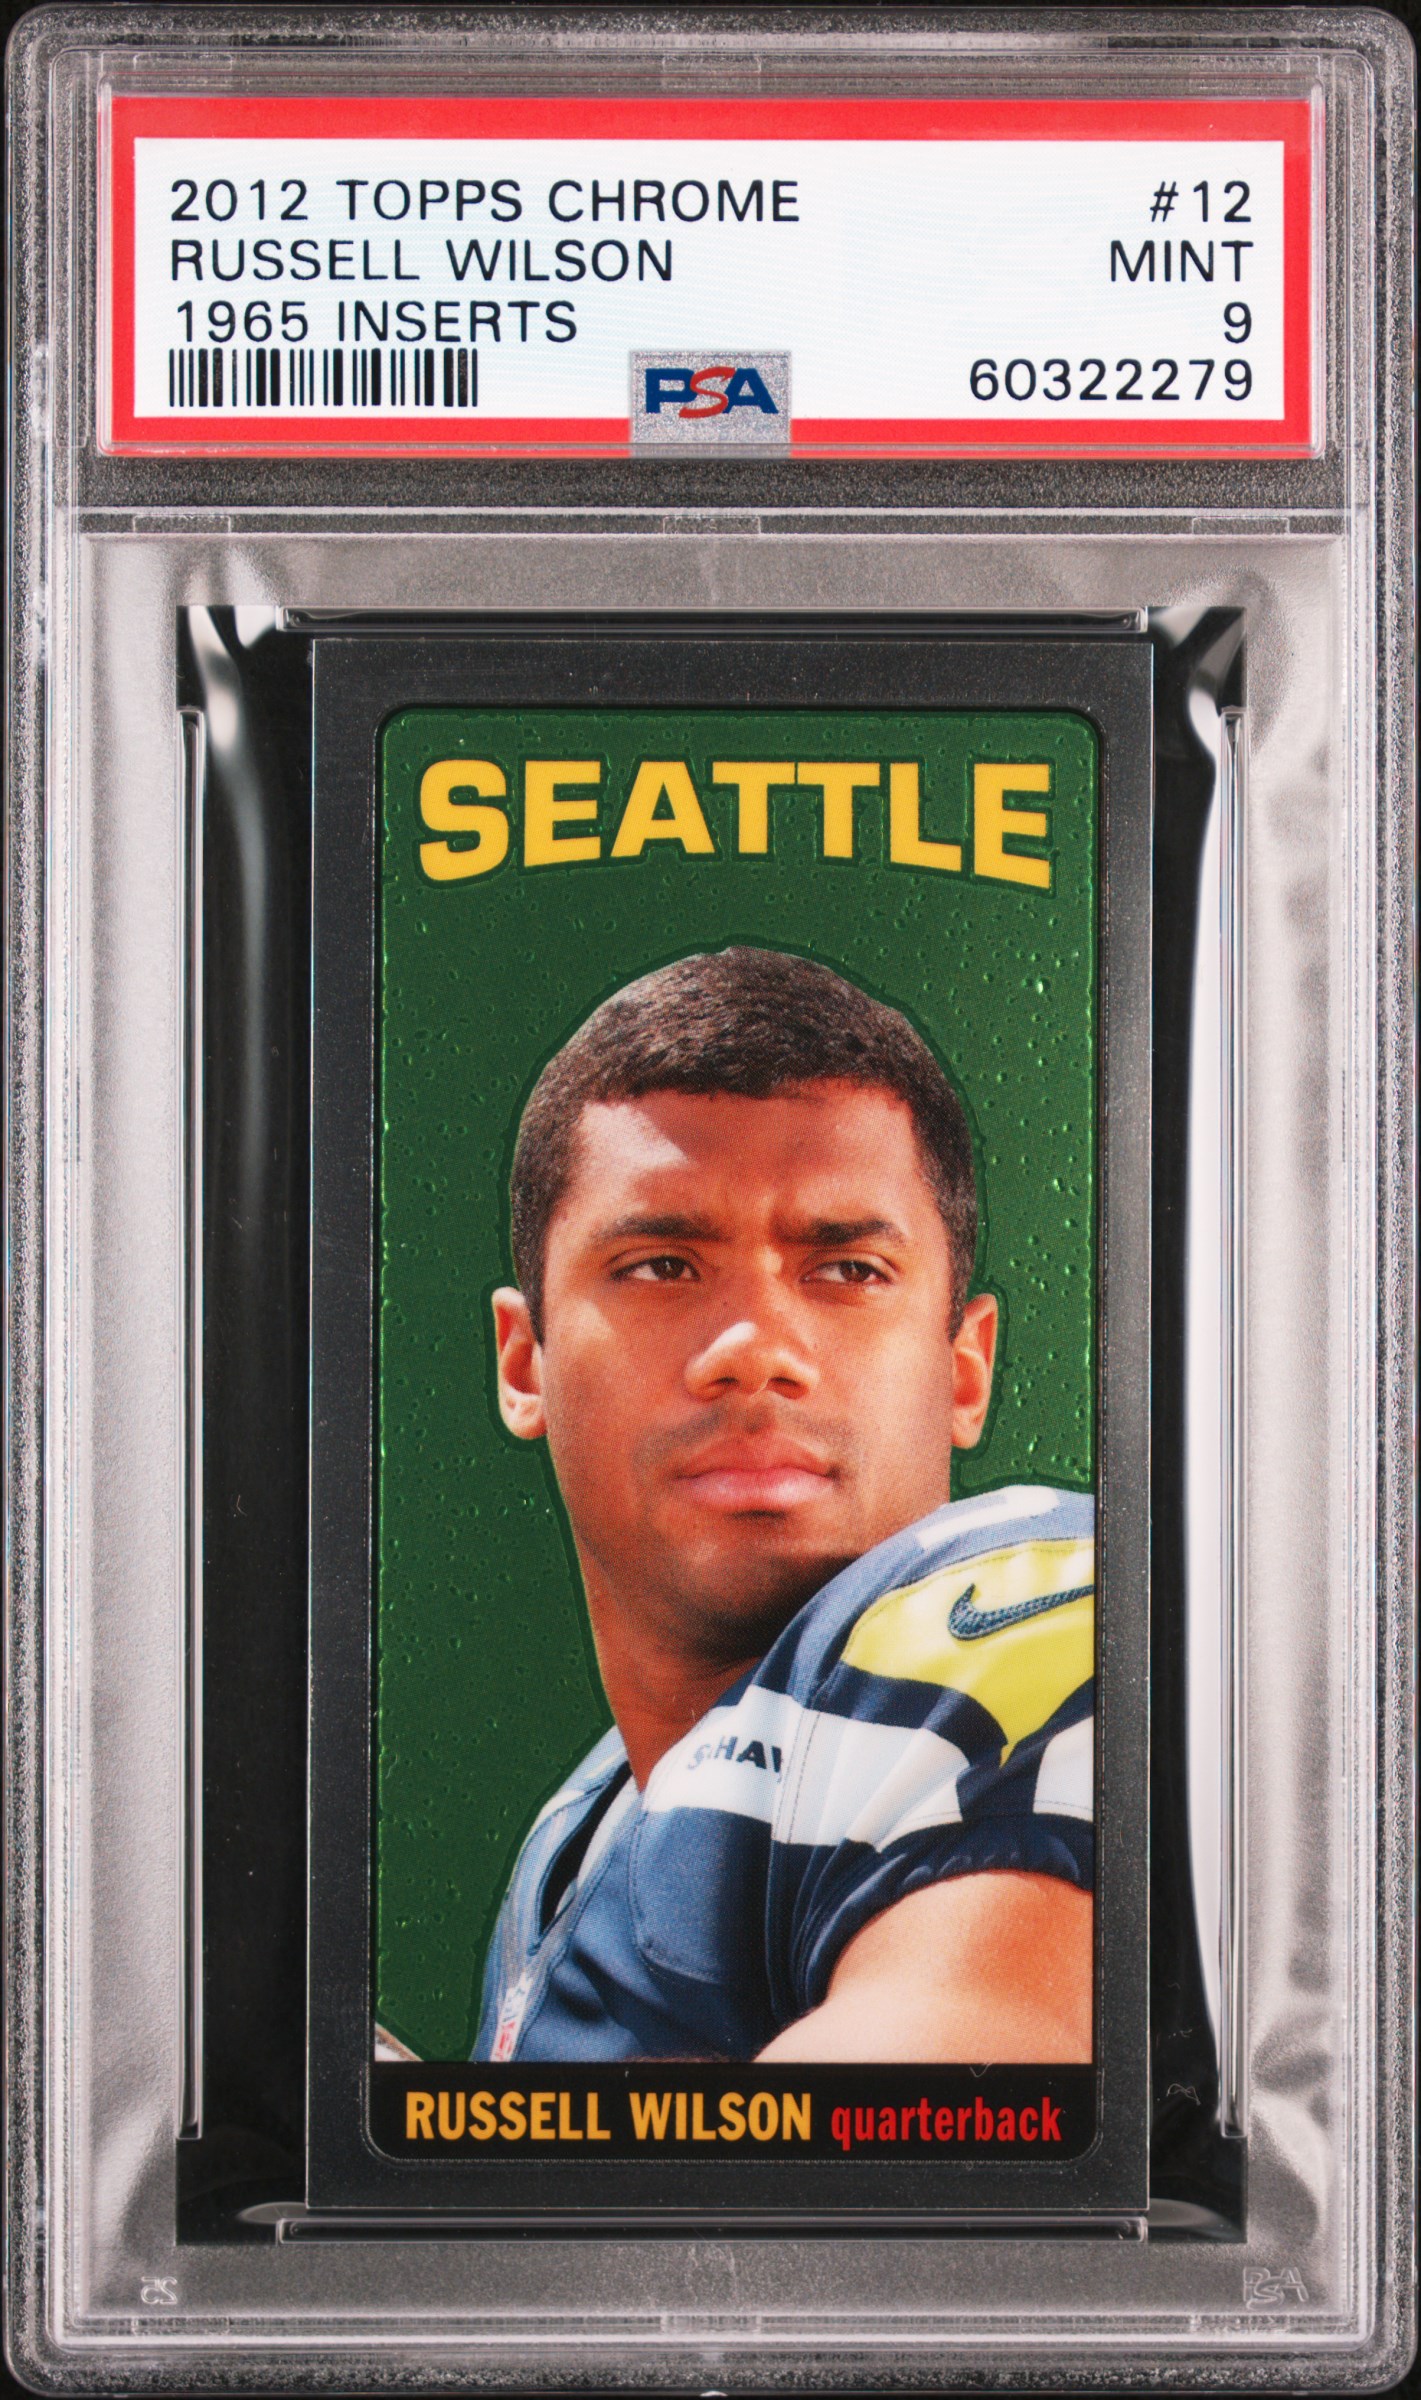 2012 Topps Chrome 1965 Inserts #12 Russell Wilson Rookie Card – PSA MINT 9